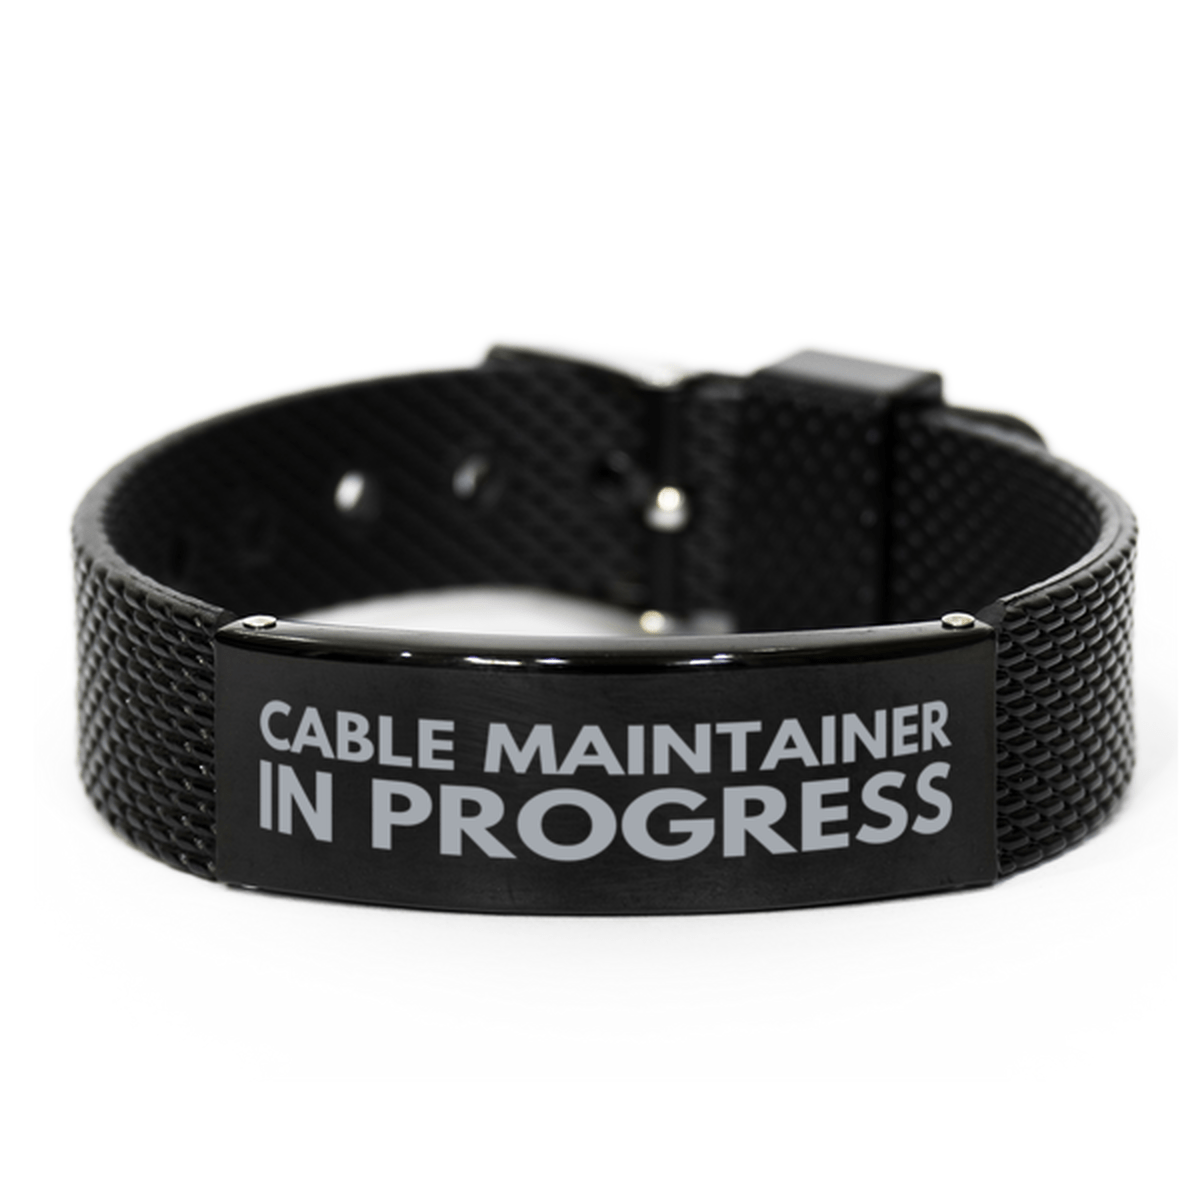 Inspirational Cable Maintainer Black Shark Mesh Bracelet, Cable Maintainer In Progress, Best Graduation Gifts for Students